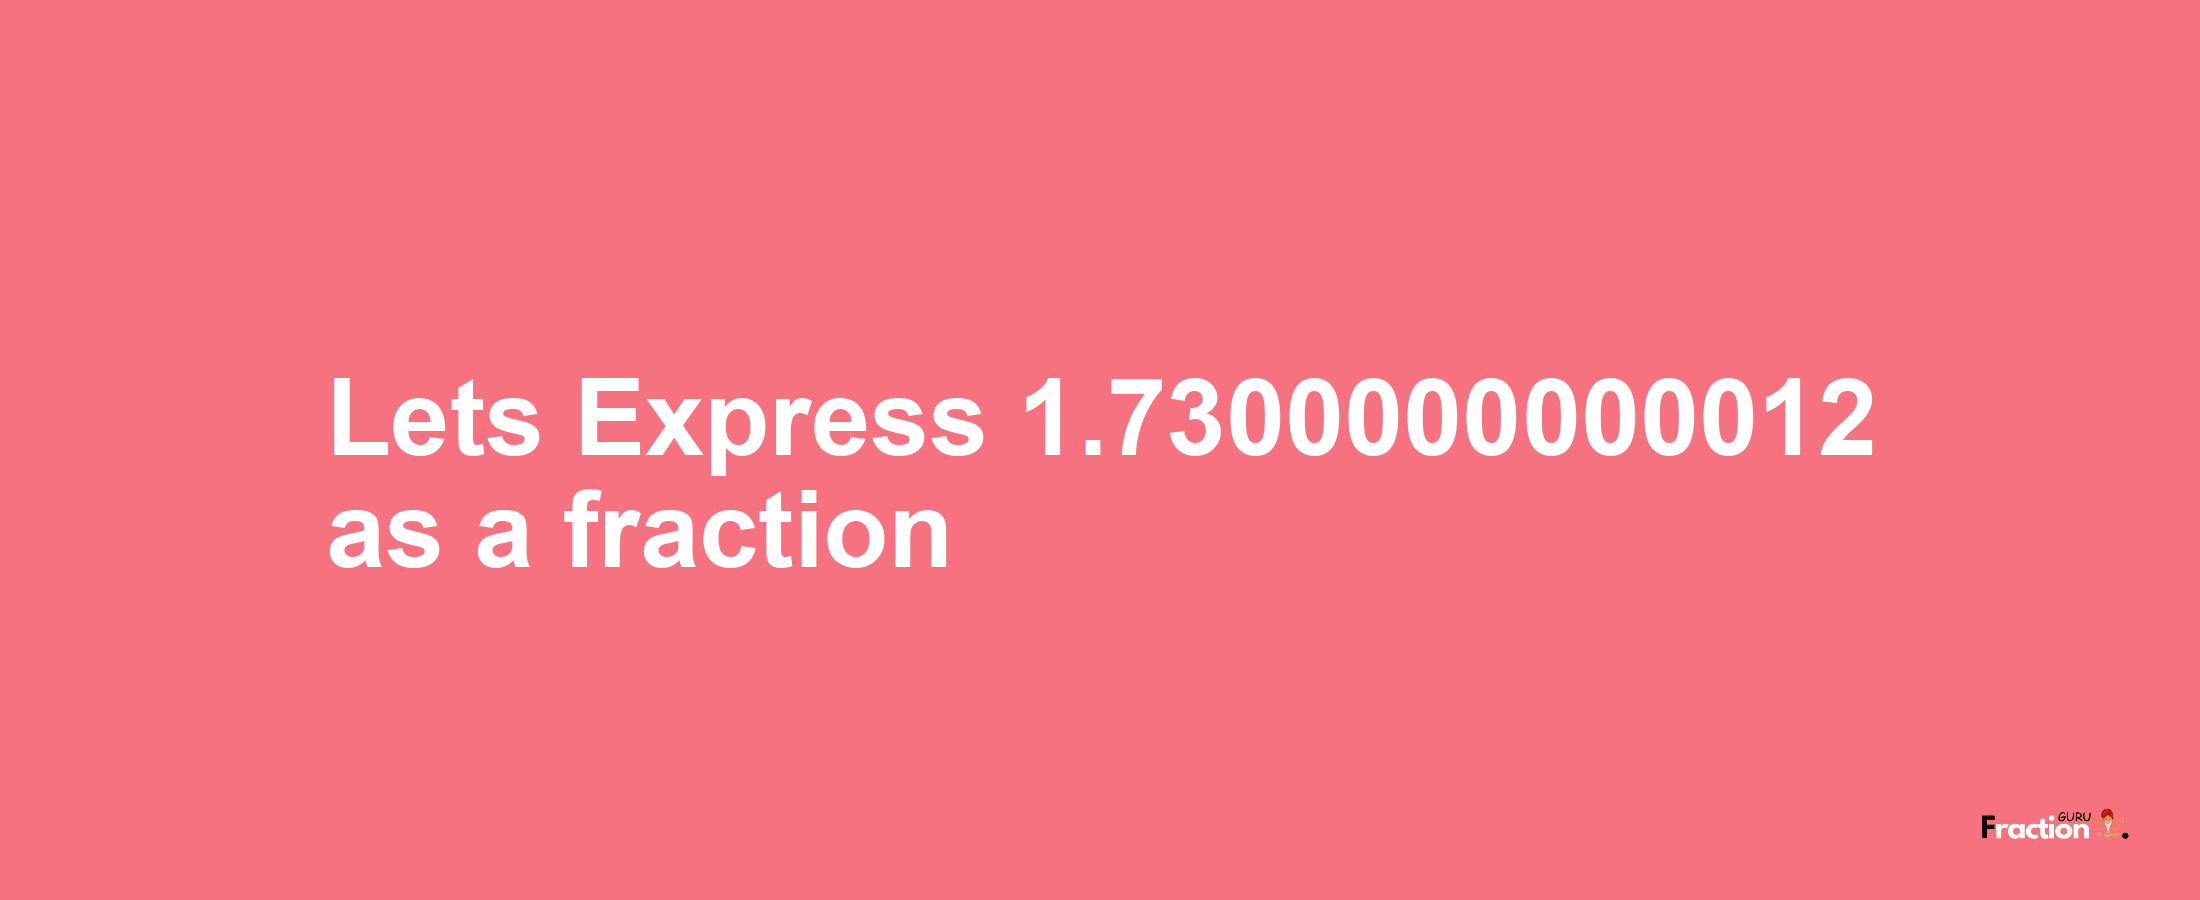 Lets Express 1.7300000000012 as afraction